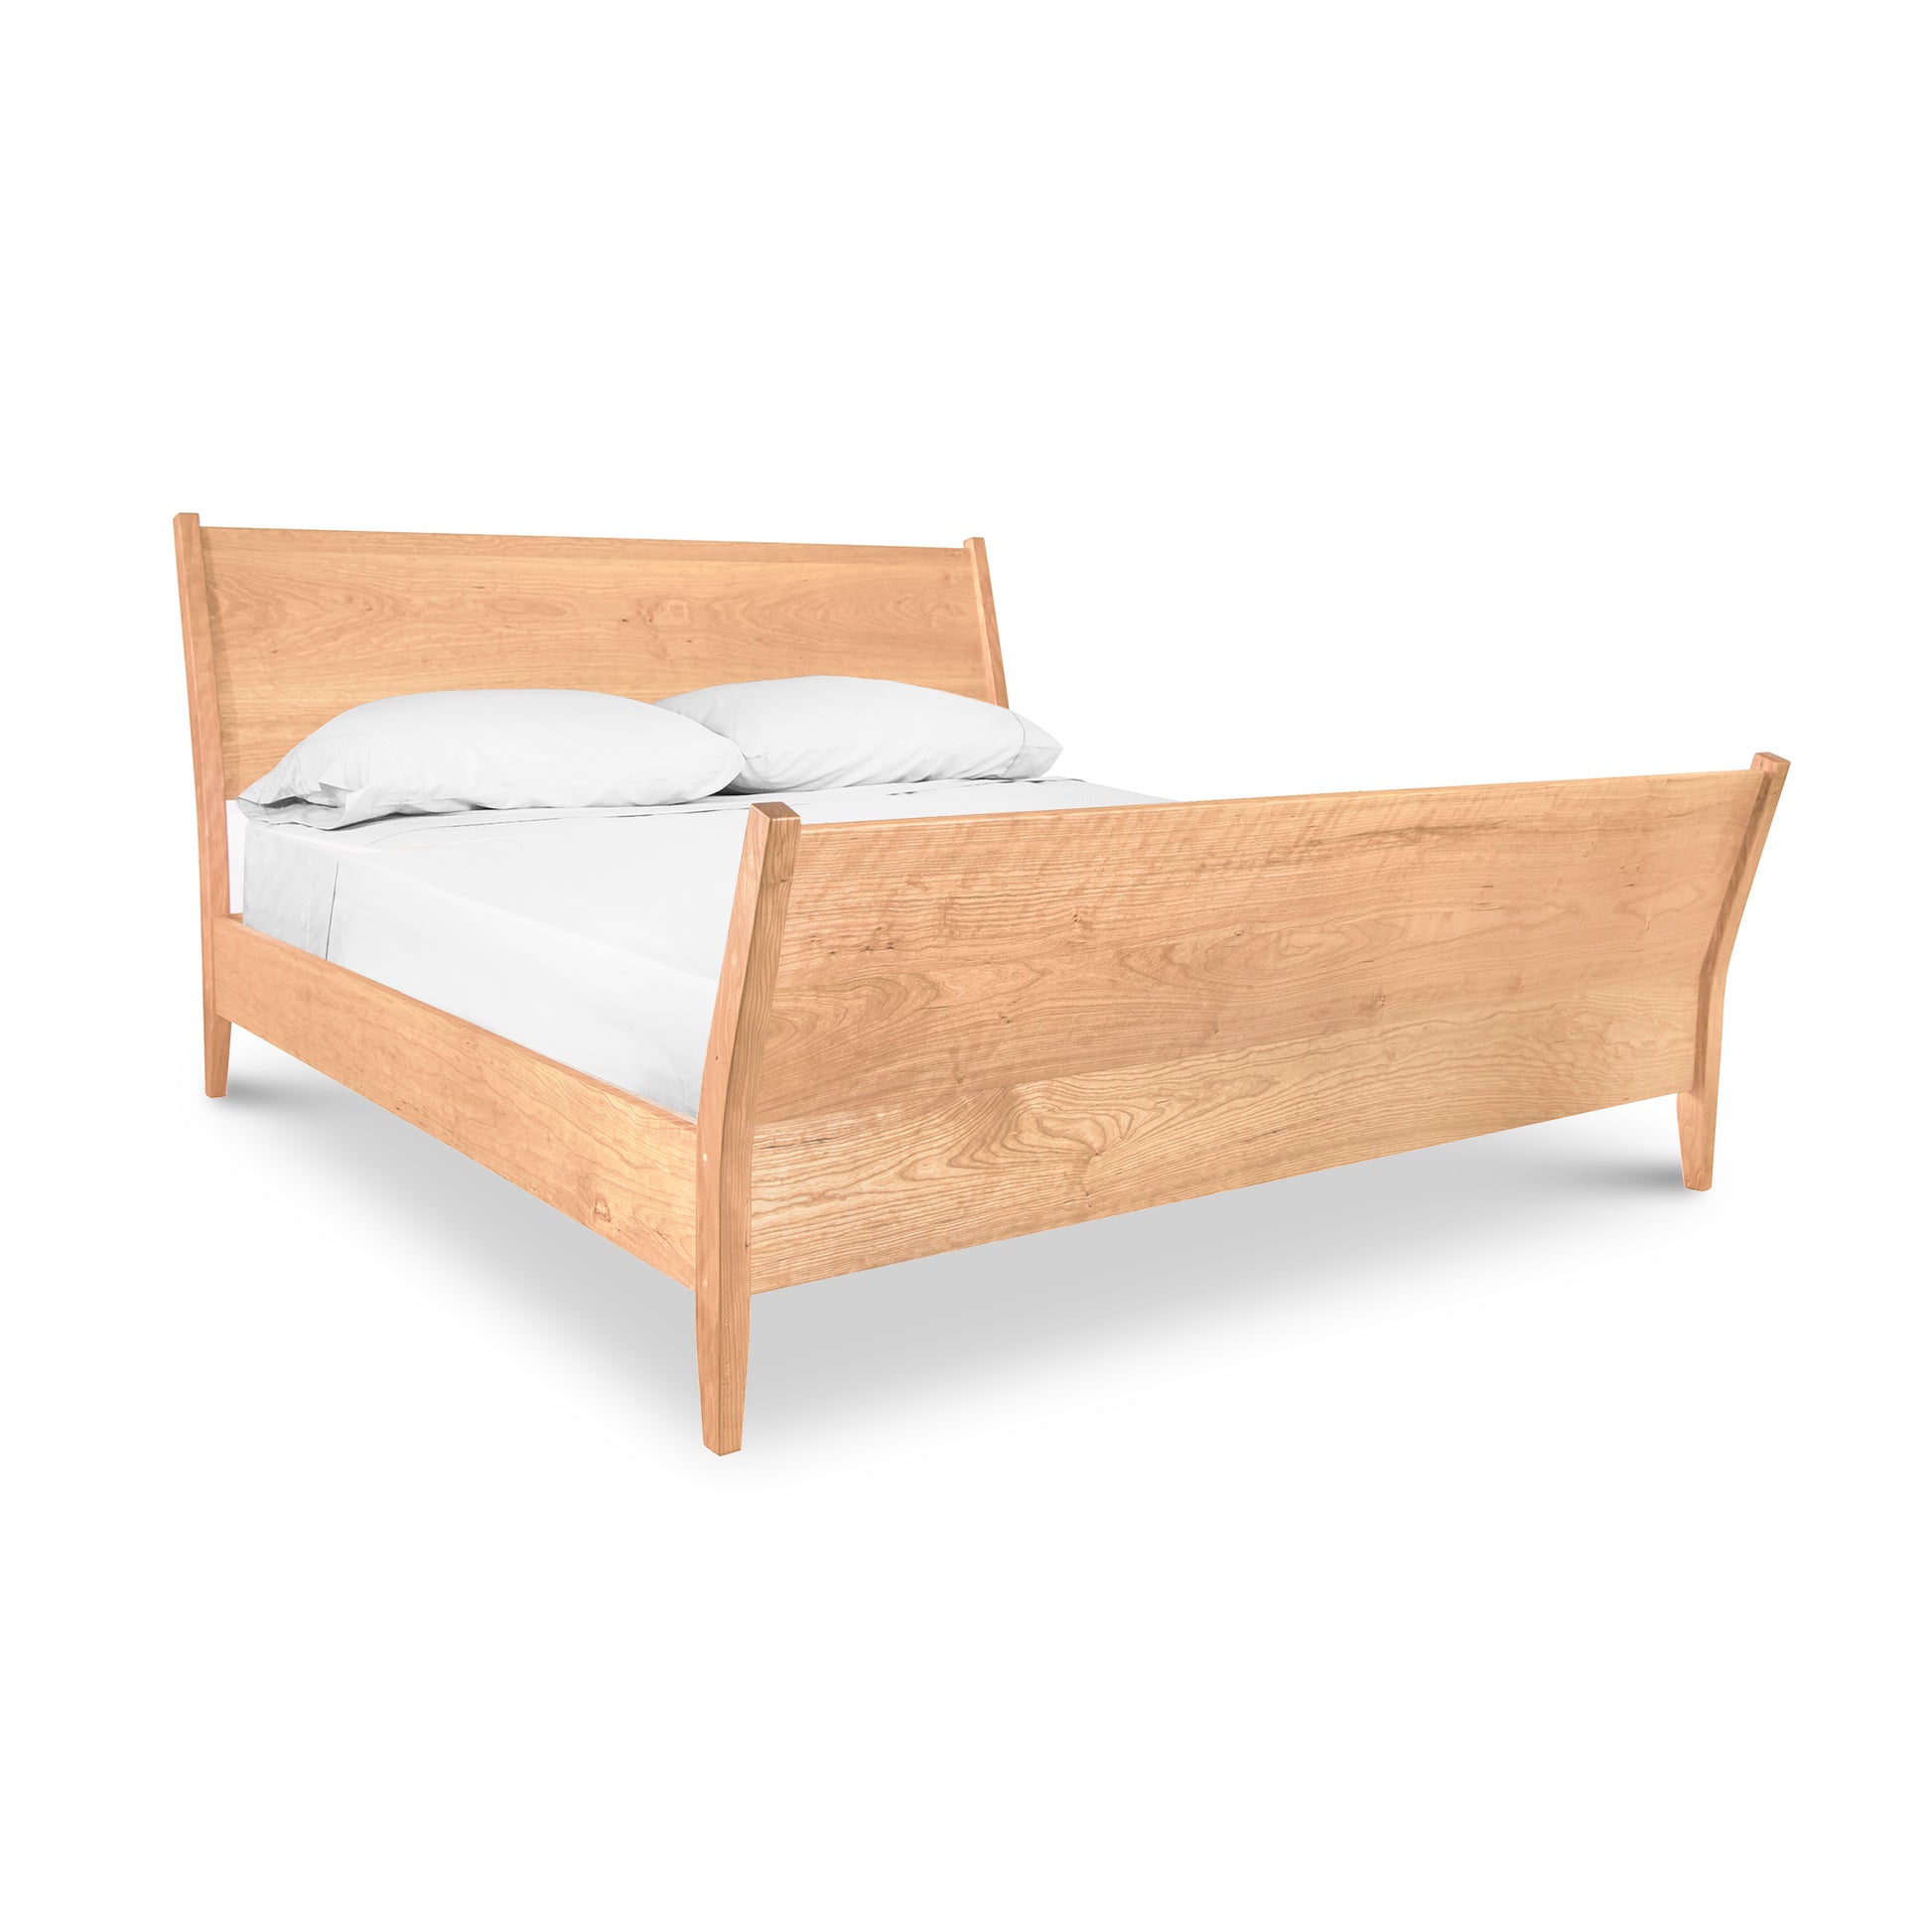 The Maple Corner Woodworks Andover Modern Incline Sleigh Bed features contemporary lines and is accompanied by white sheets, creating a stylish and ergonomic wooden bed.